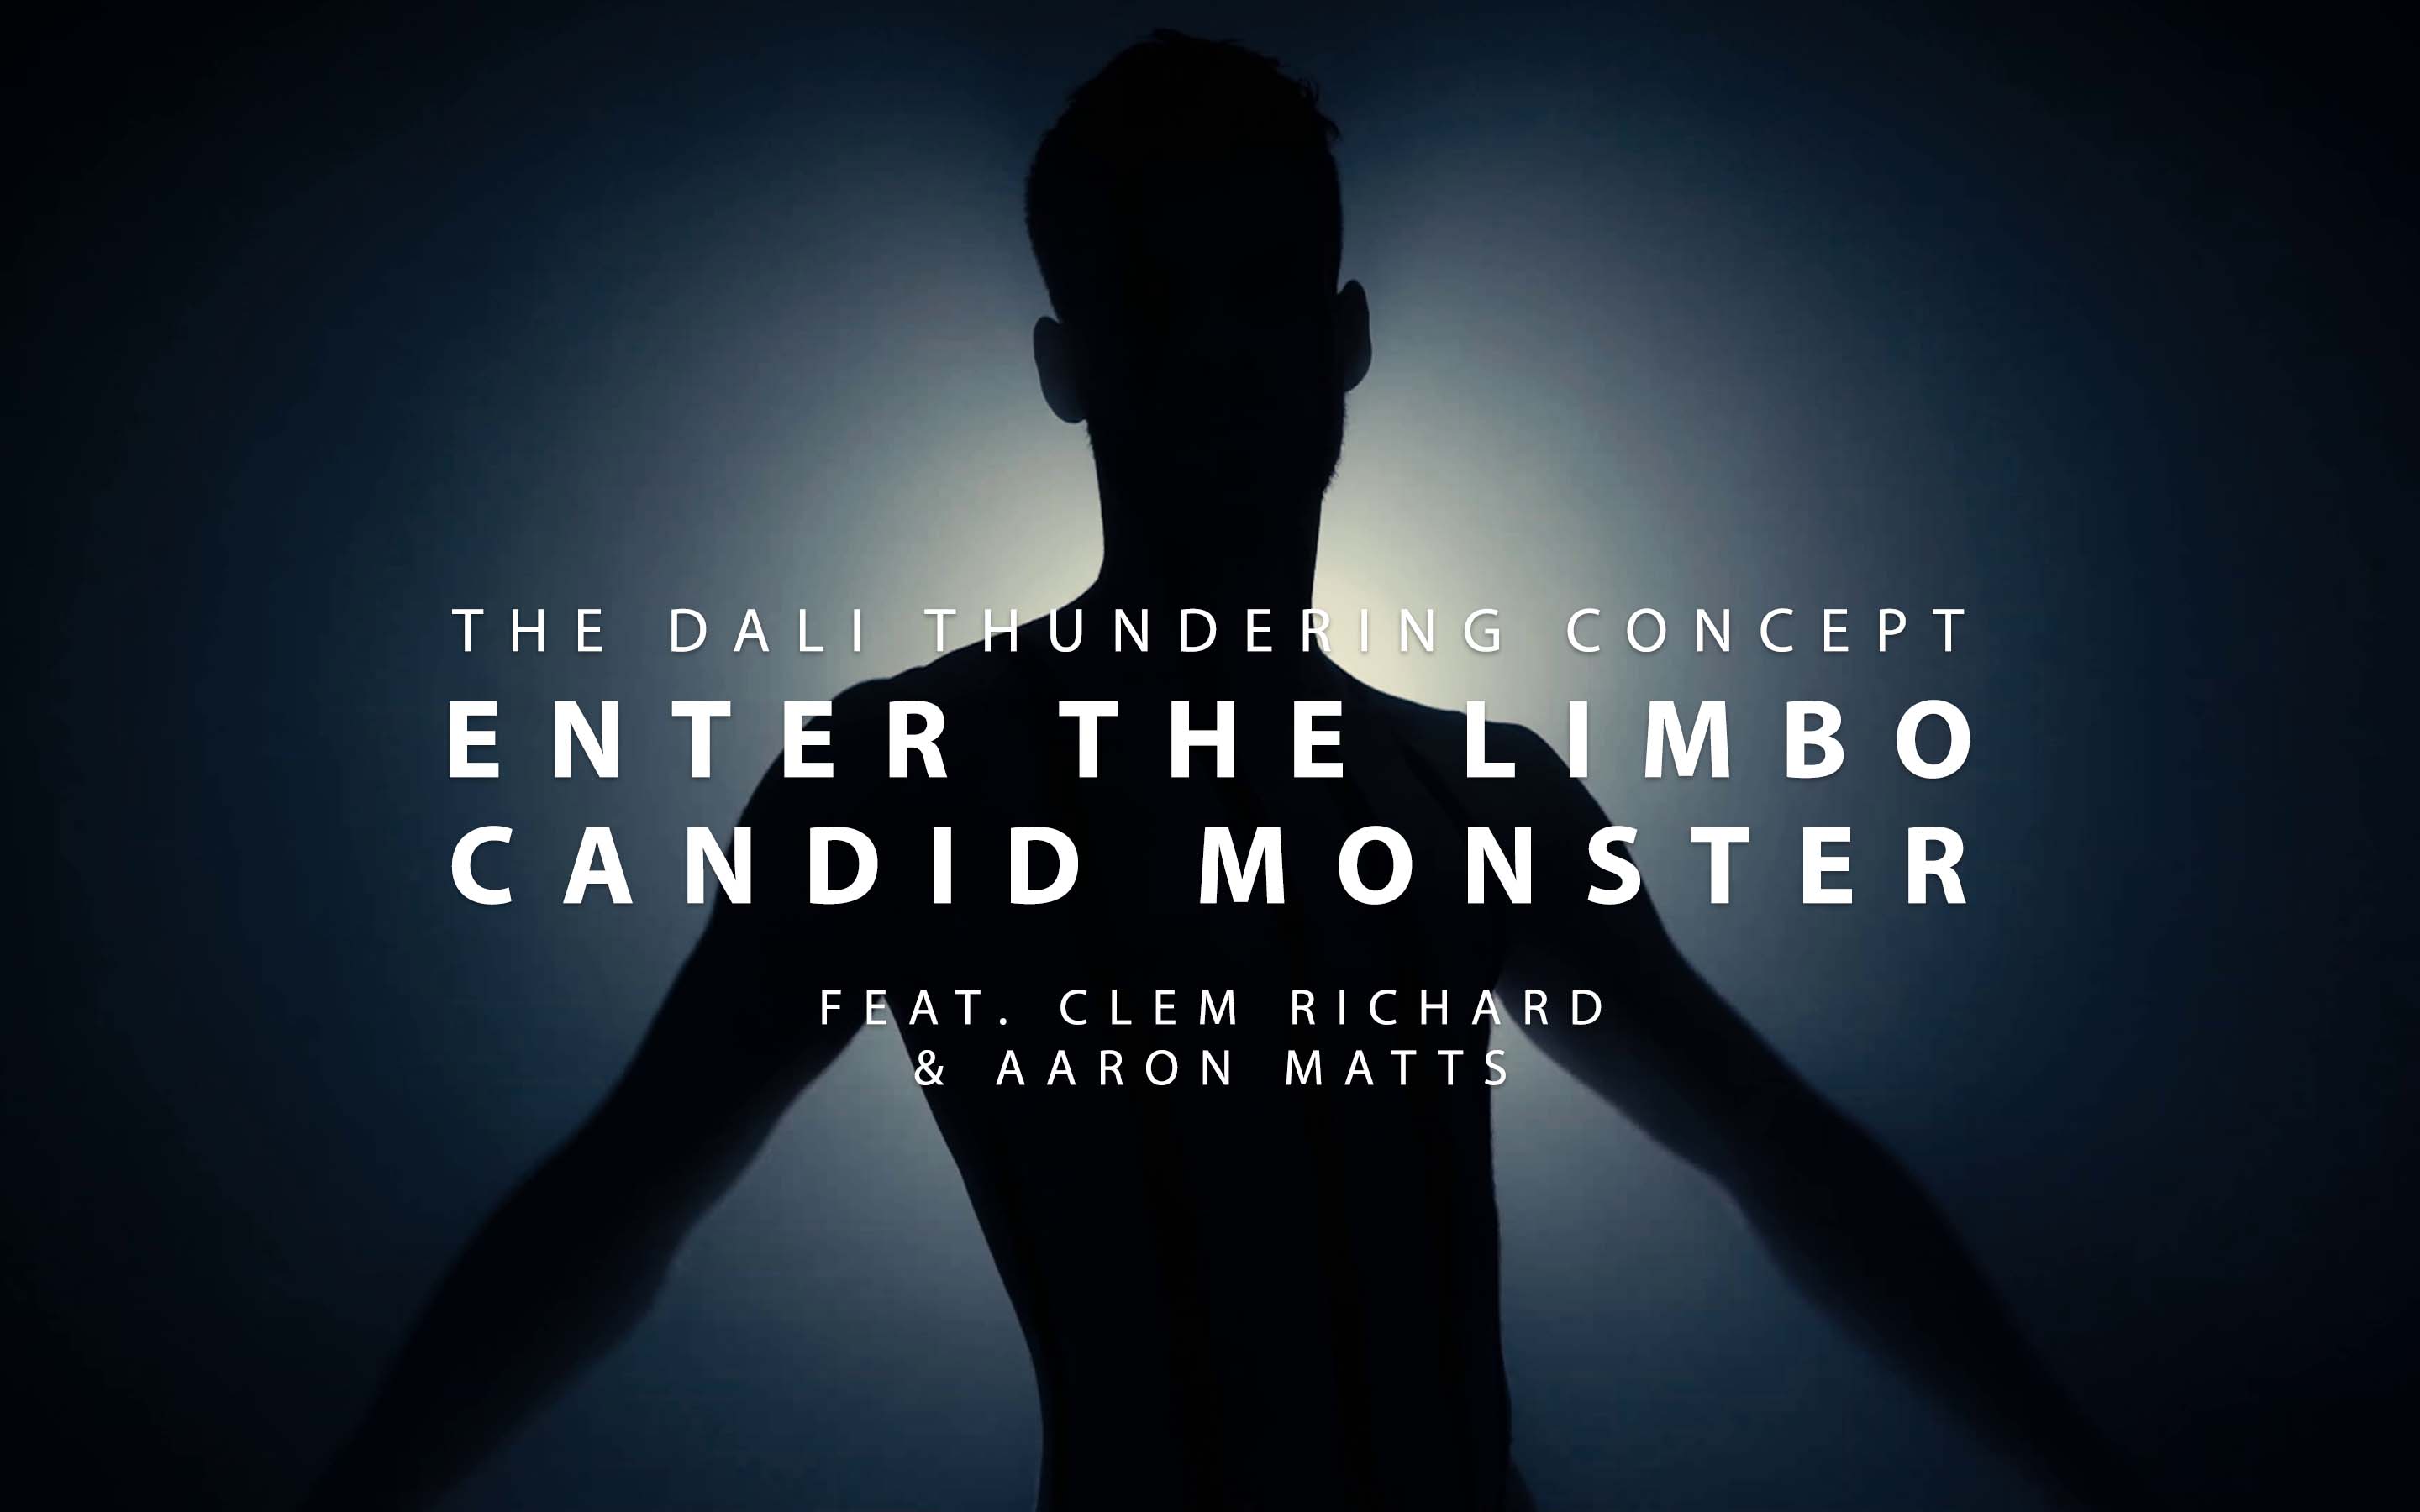 Load video: TDTC - Enter The Limbo / Candid Monster music video